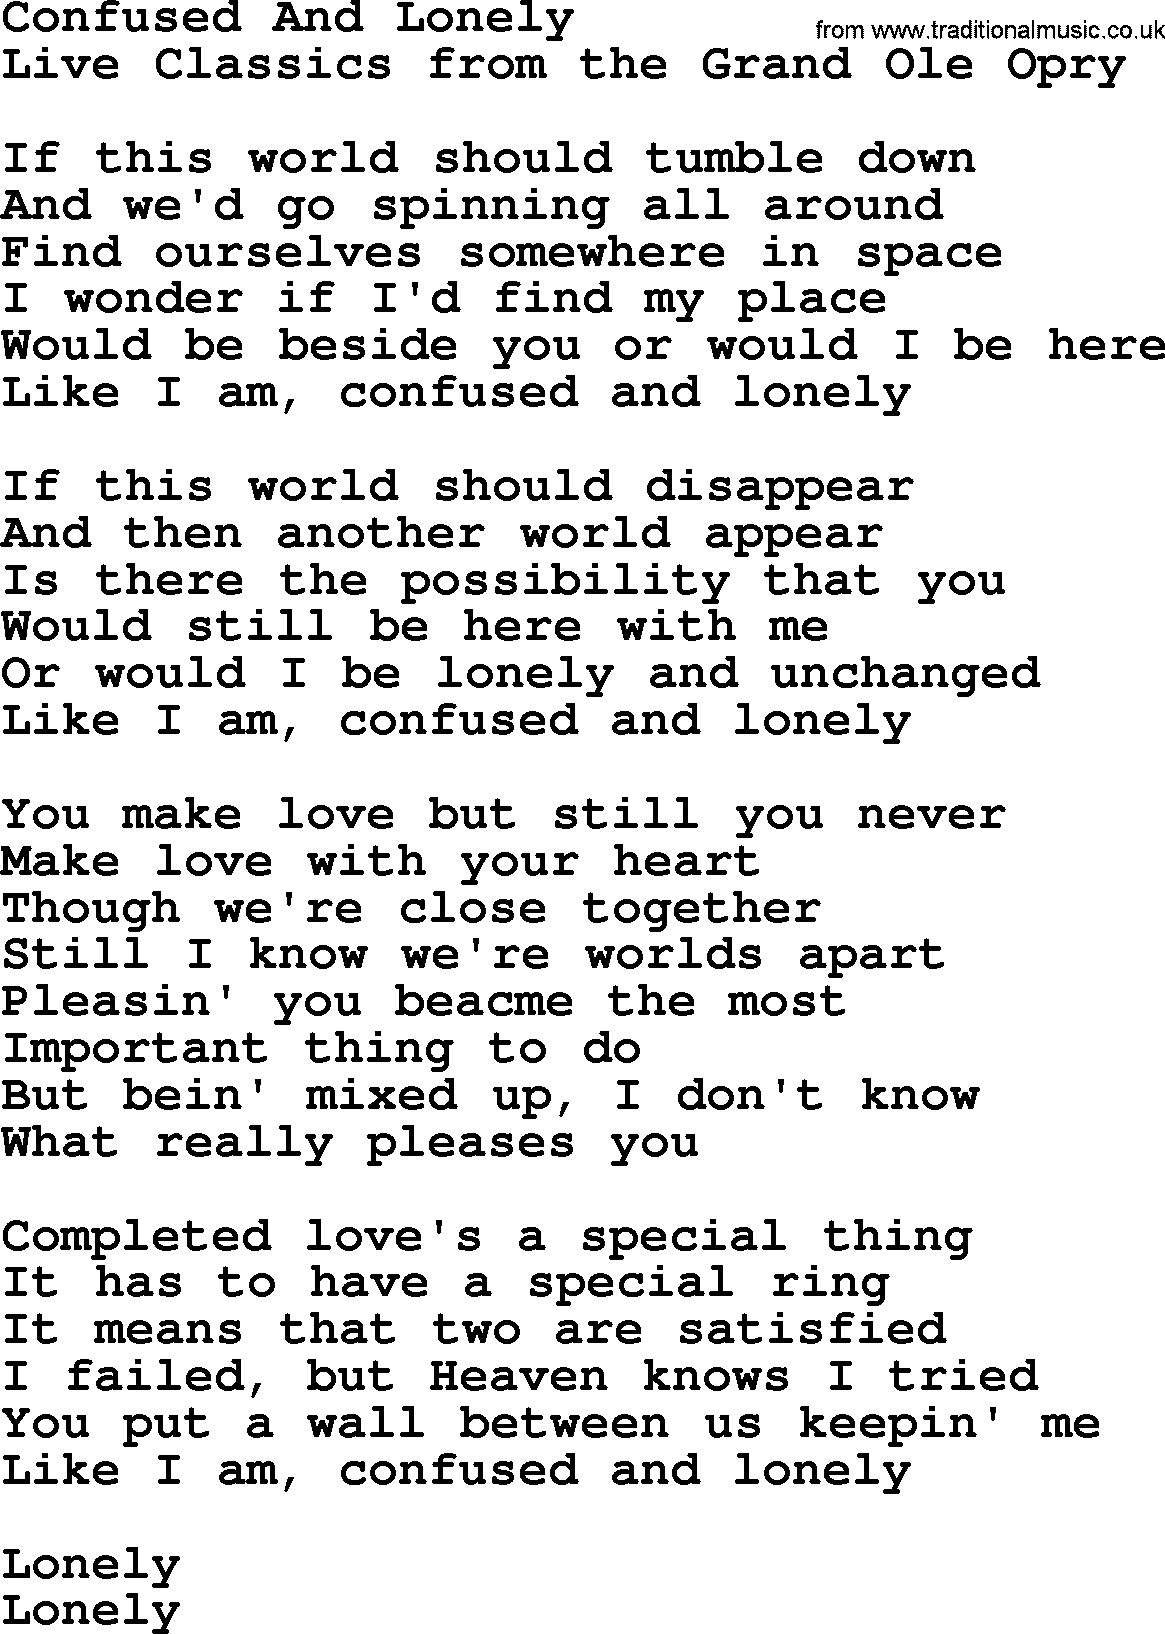 Confused And Lonely, by Marty Robbins - lyrics